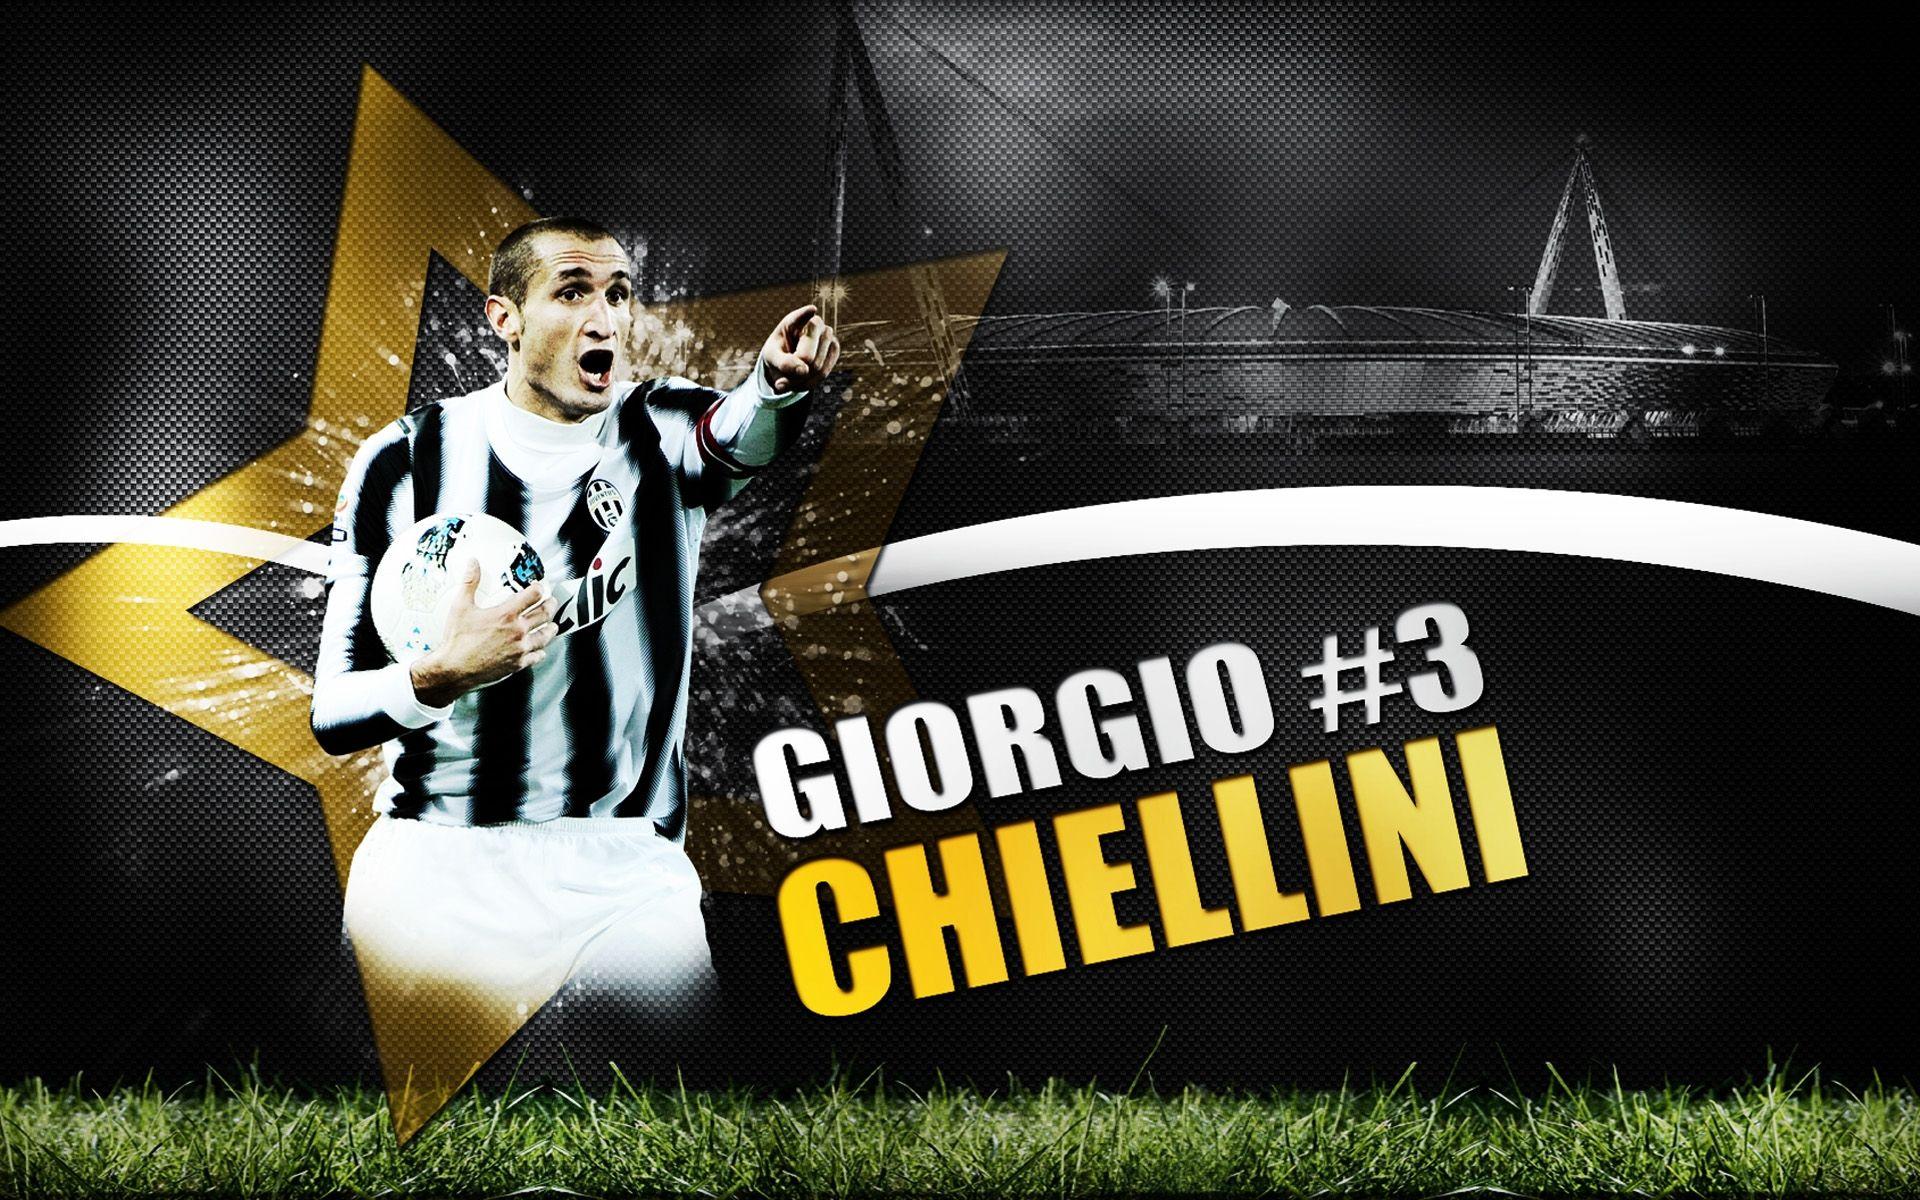 _The_football_player_of_Juventus_Giorgio_Chiellini_with_a_ball_050283_